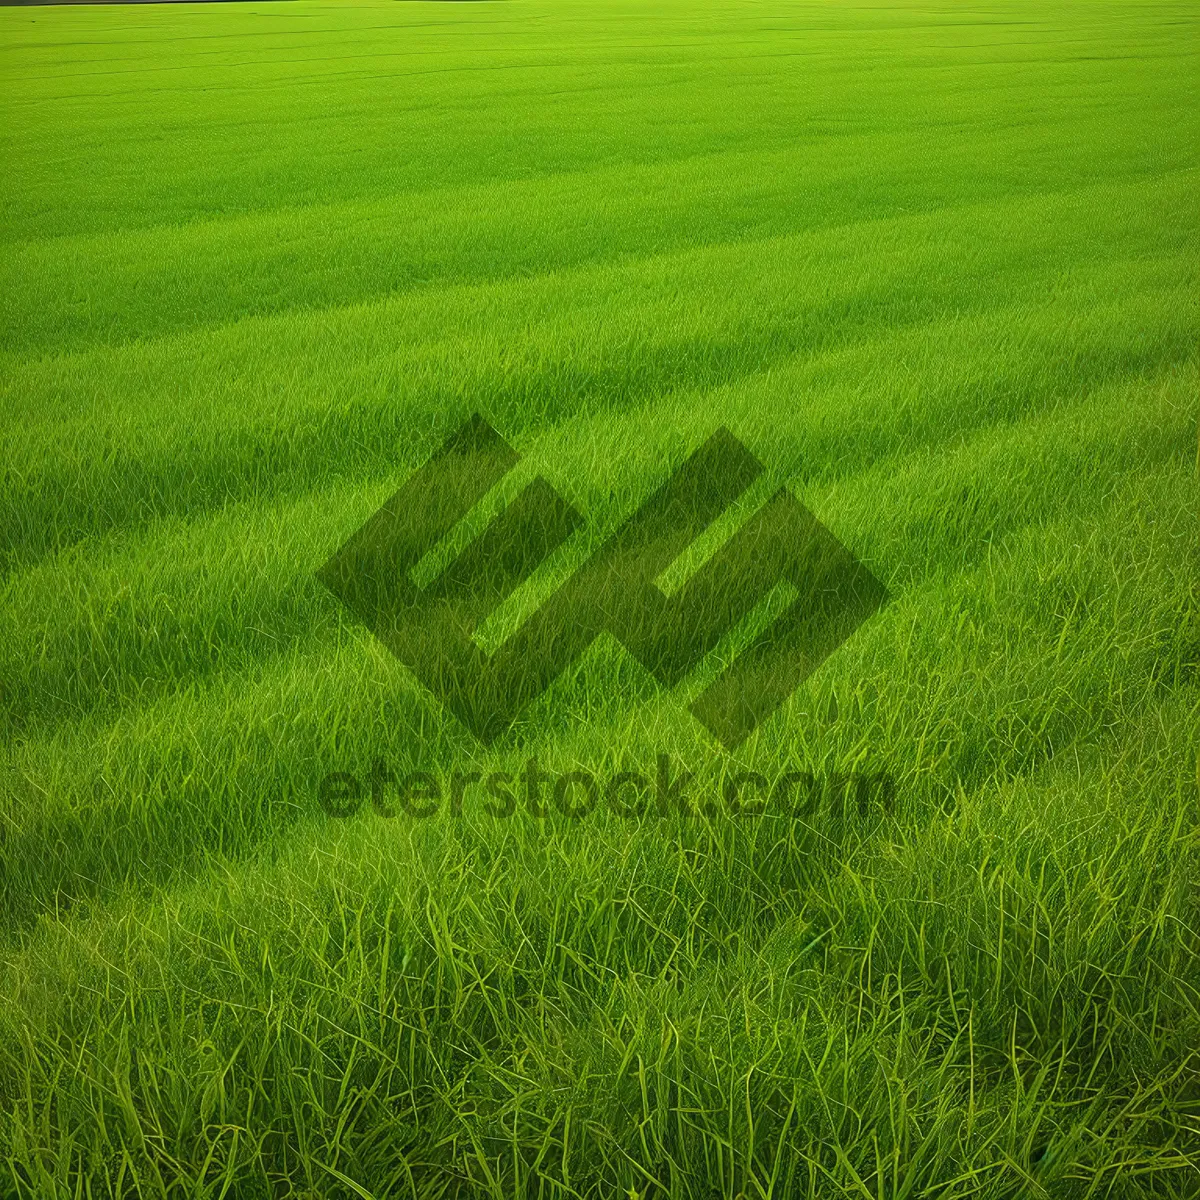 Picture of Vibrant Summer Meadow with Lush Green Grass